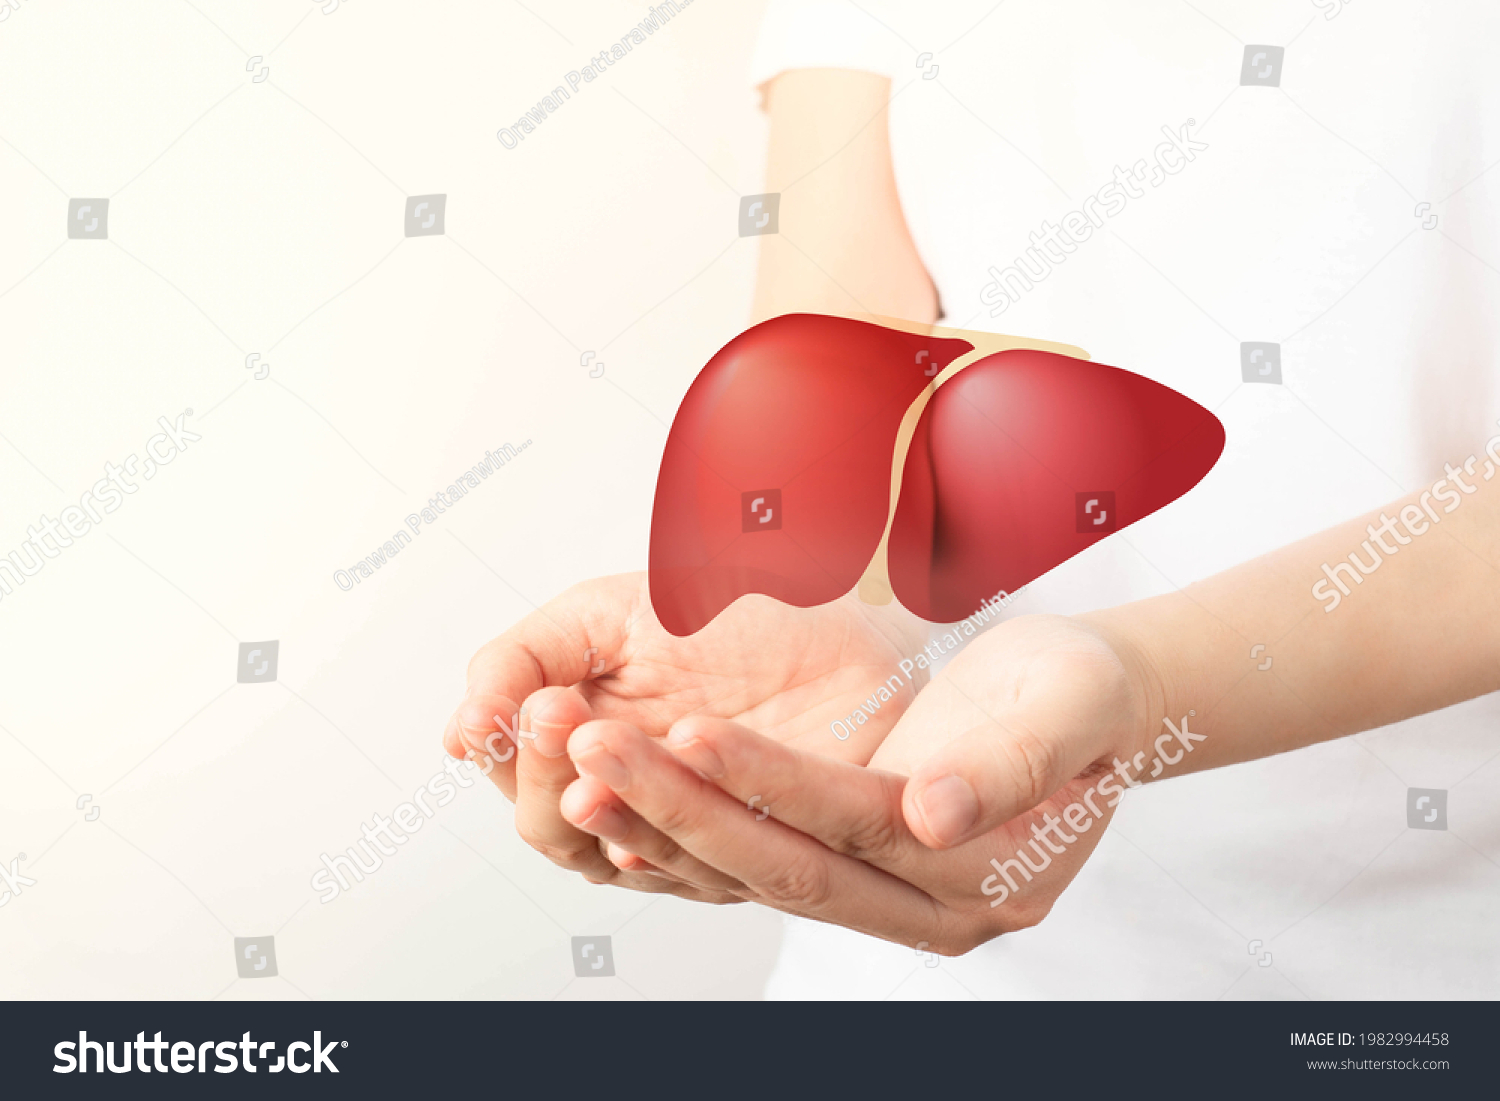 Healthy liver. Human hands holding liver symbol on white background. Protecting against liver disease and organ donation concept. #1982994458